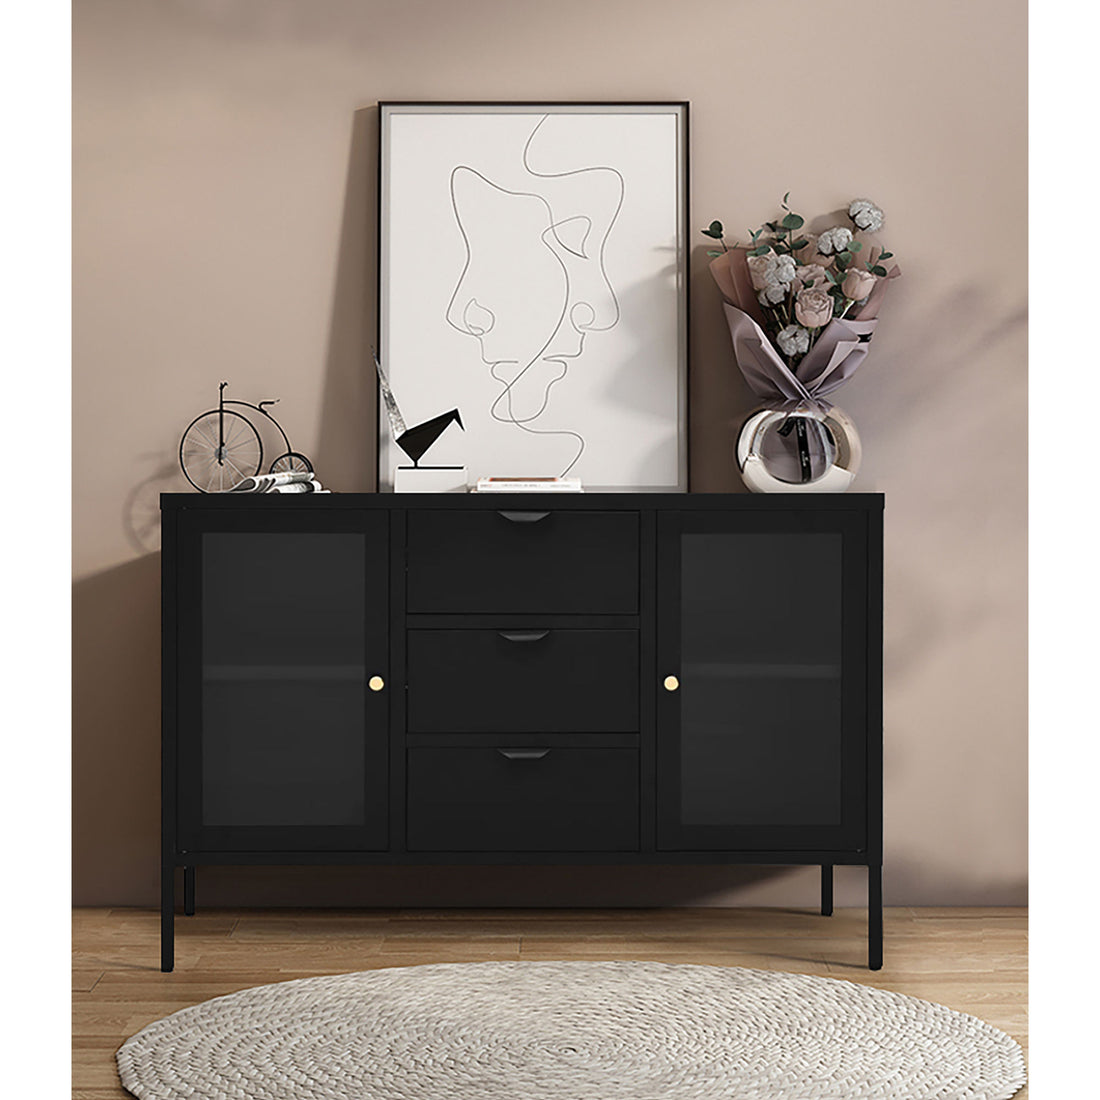 House Nordic Dalby sideboard